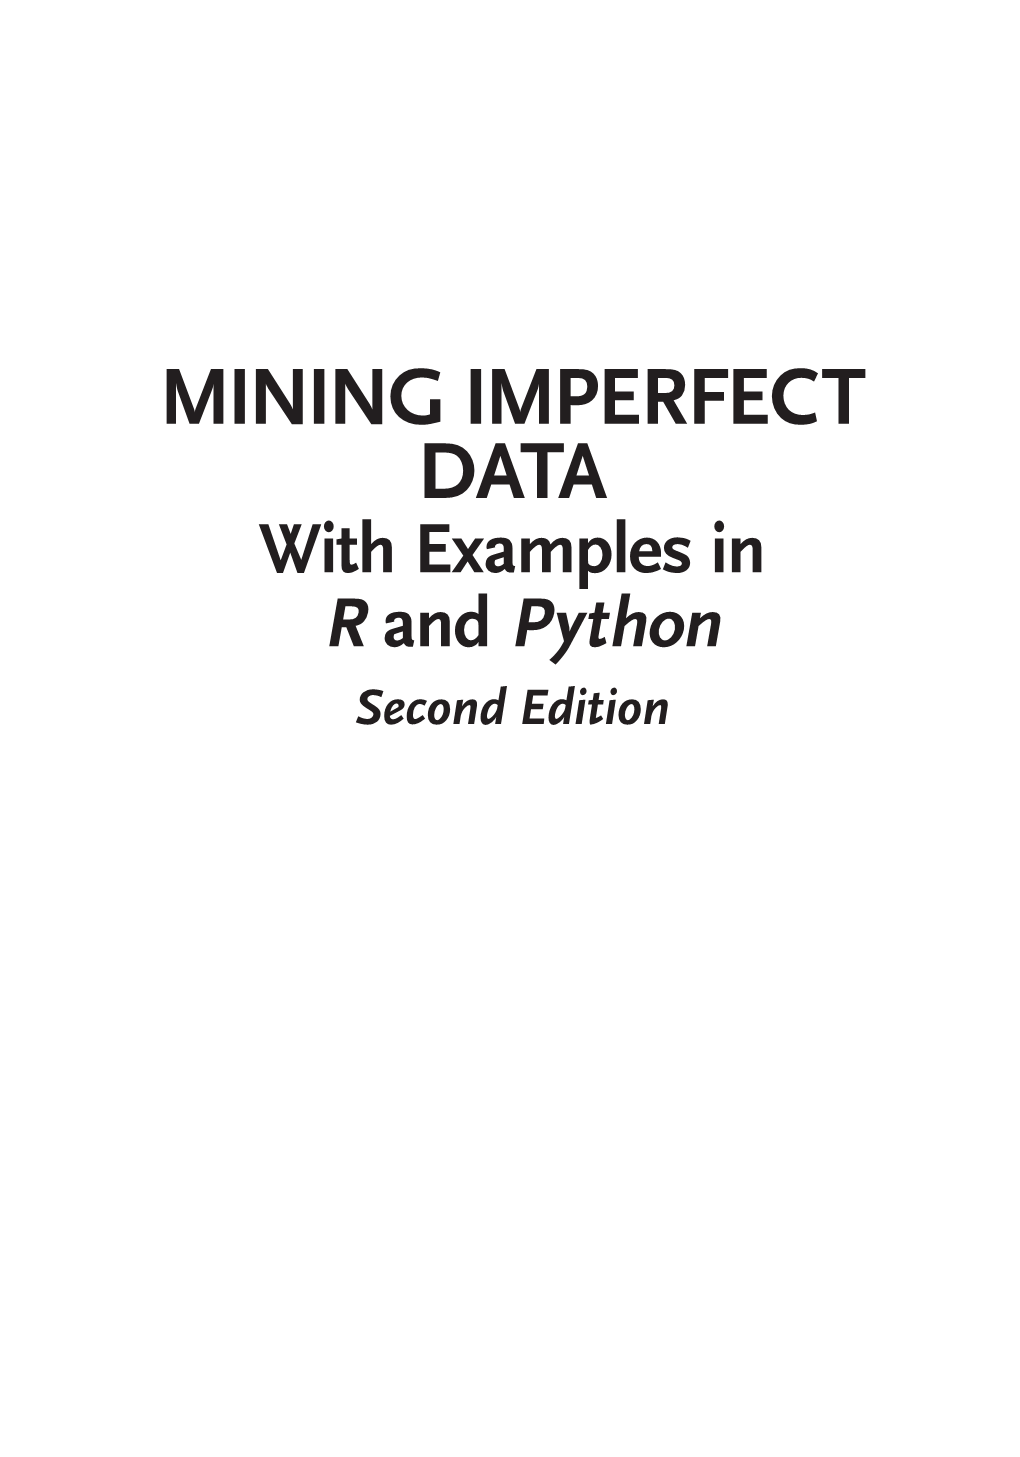 MINING IMPERFECT DATA with Examples in R and Python Second Edition